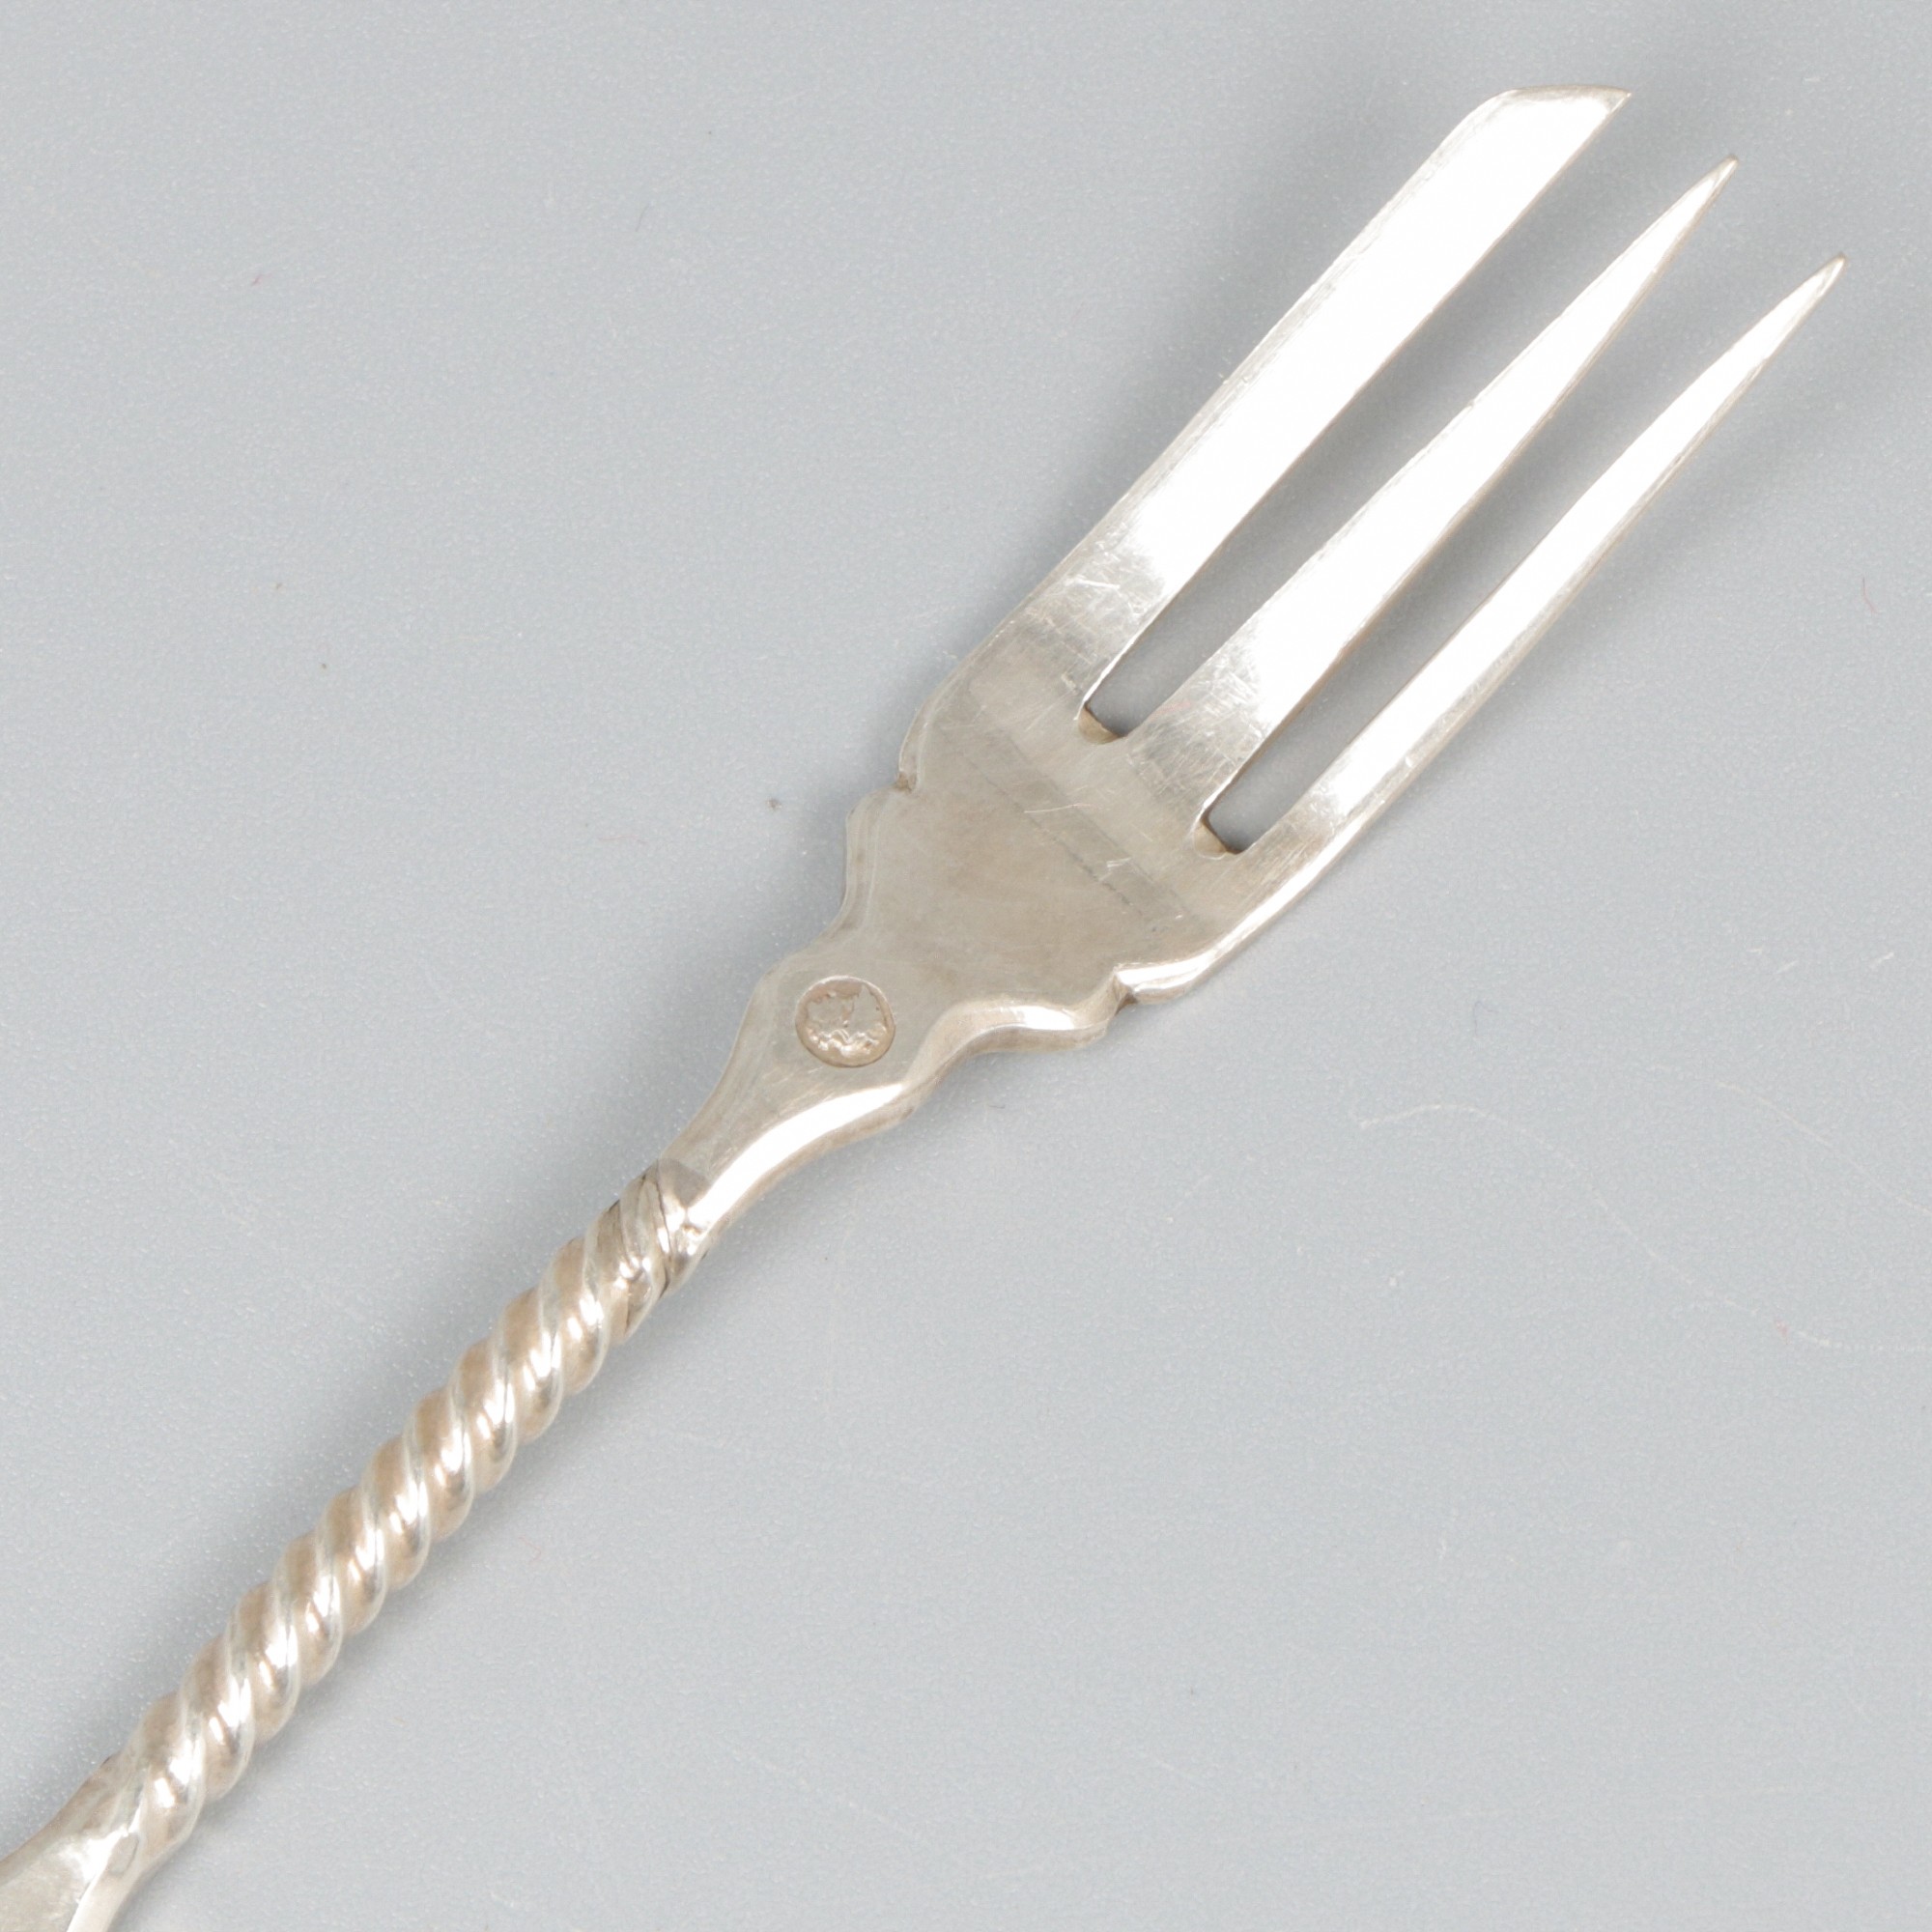 12-piece set of cake / pastry forks silver. - Image 5 of 7